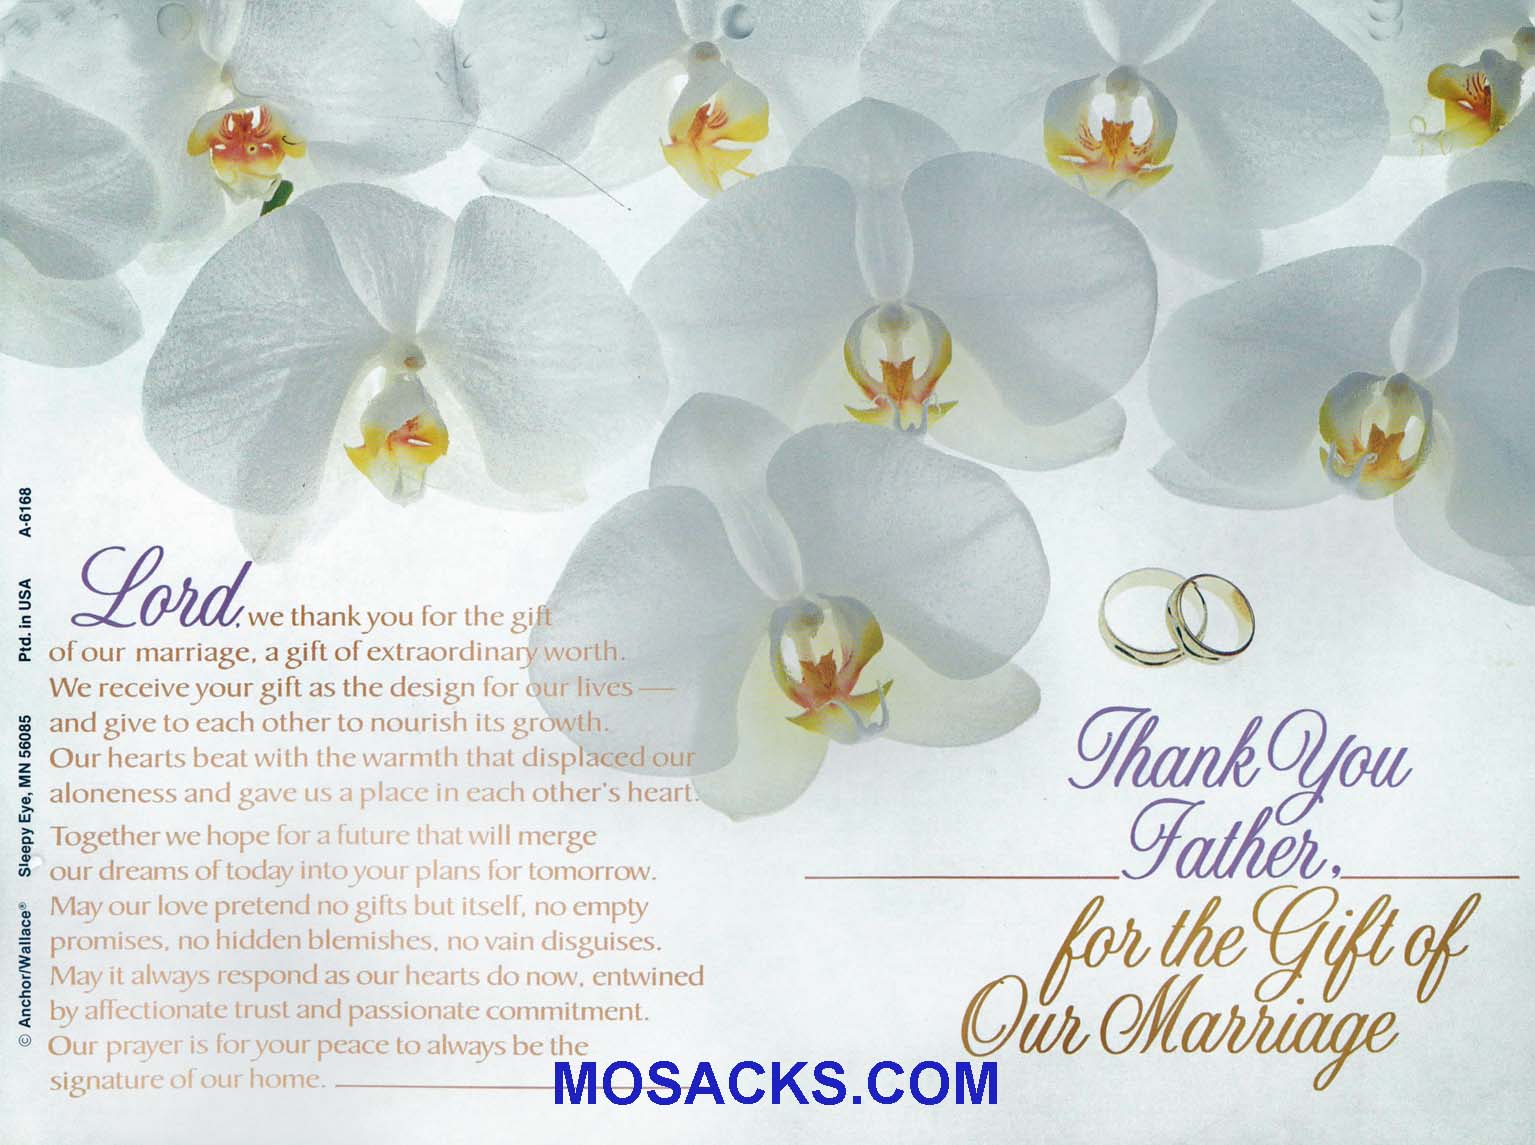 Wedding Bulletin Covers Thank You Father 100 Pack-A6168, Wedding Cover